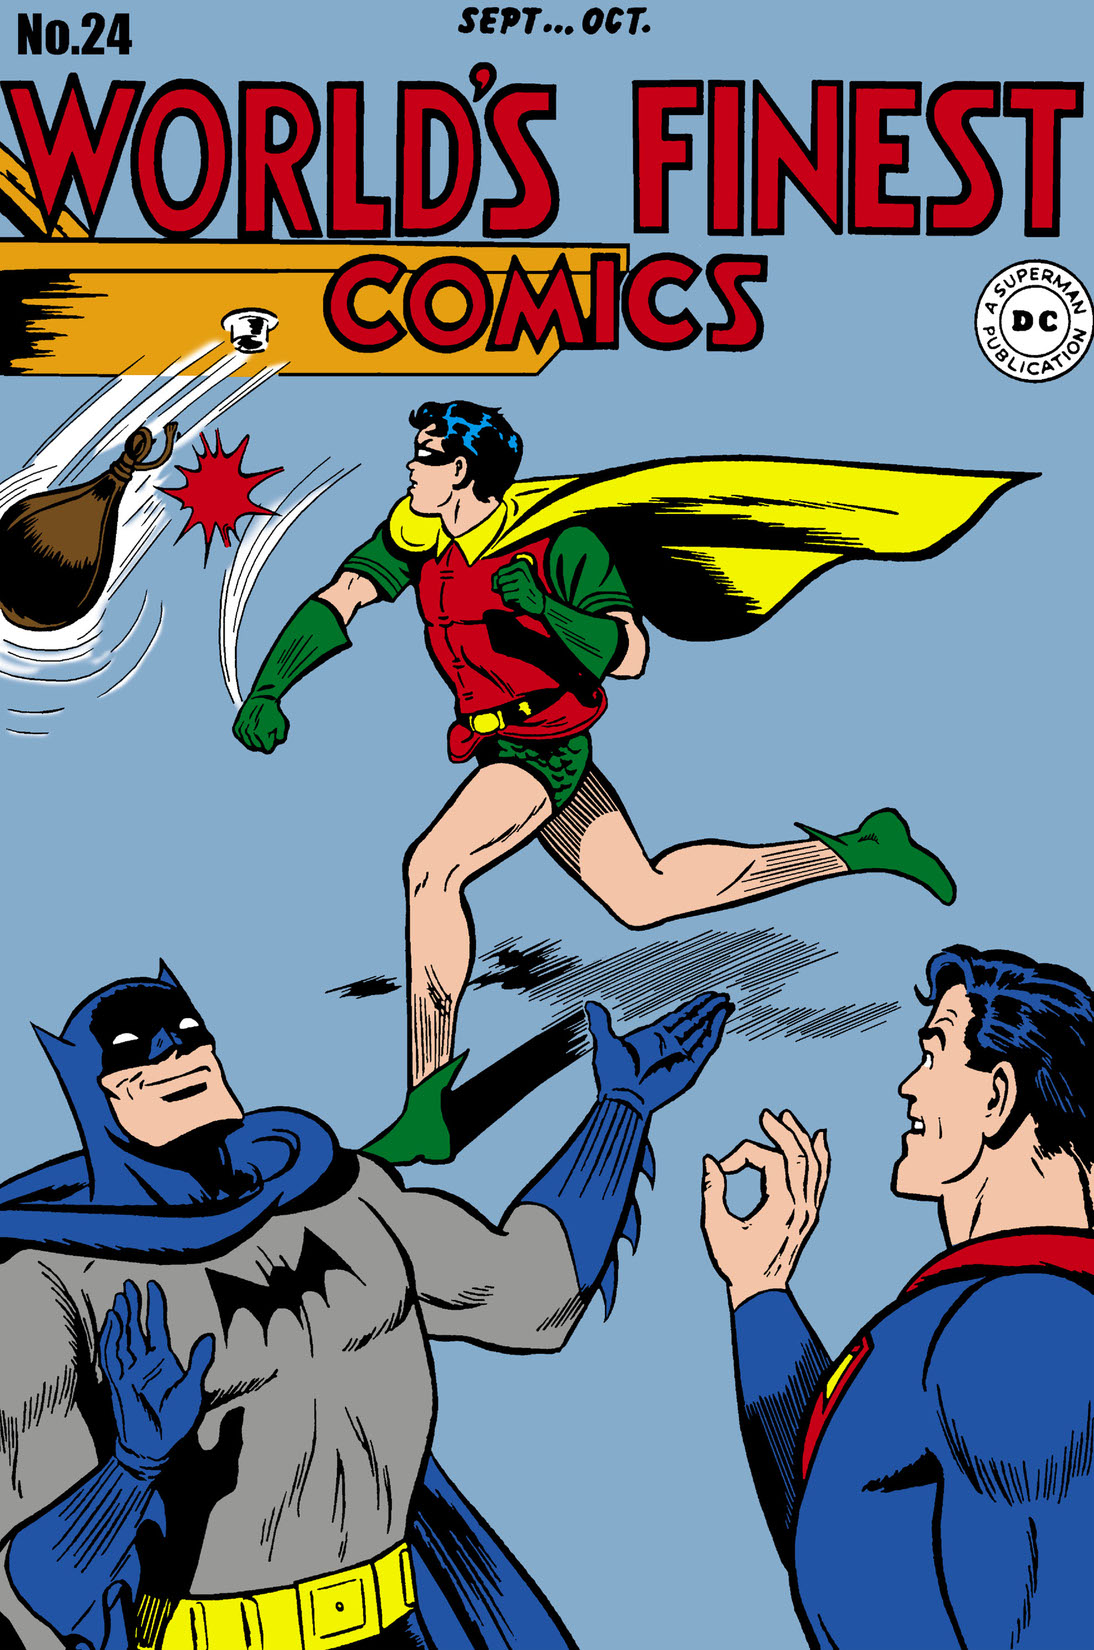 World's Finest Comics (1941-) #24 preview images